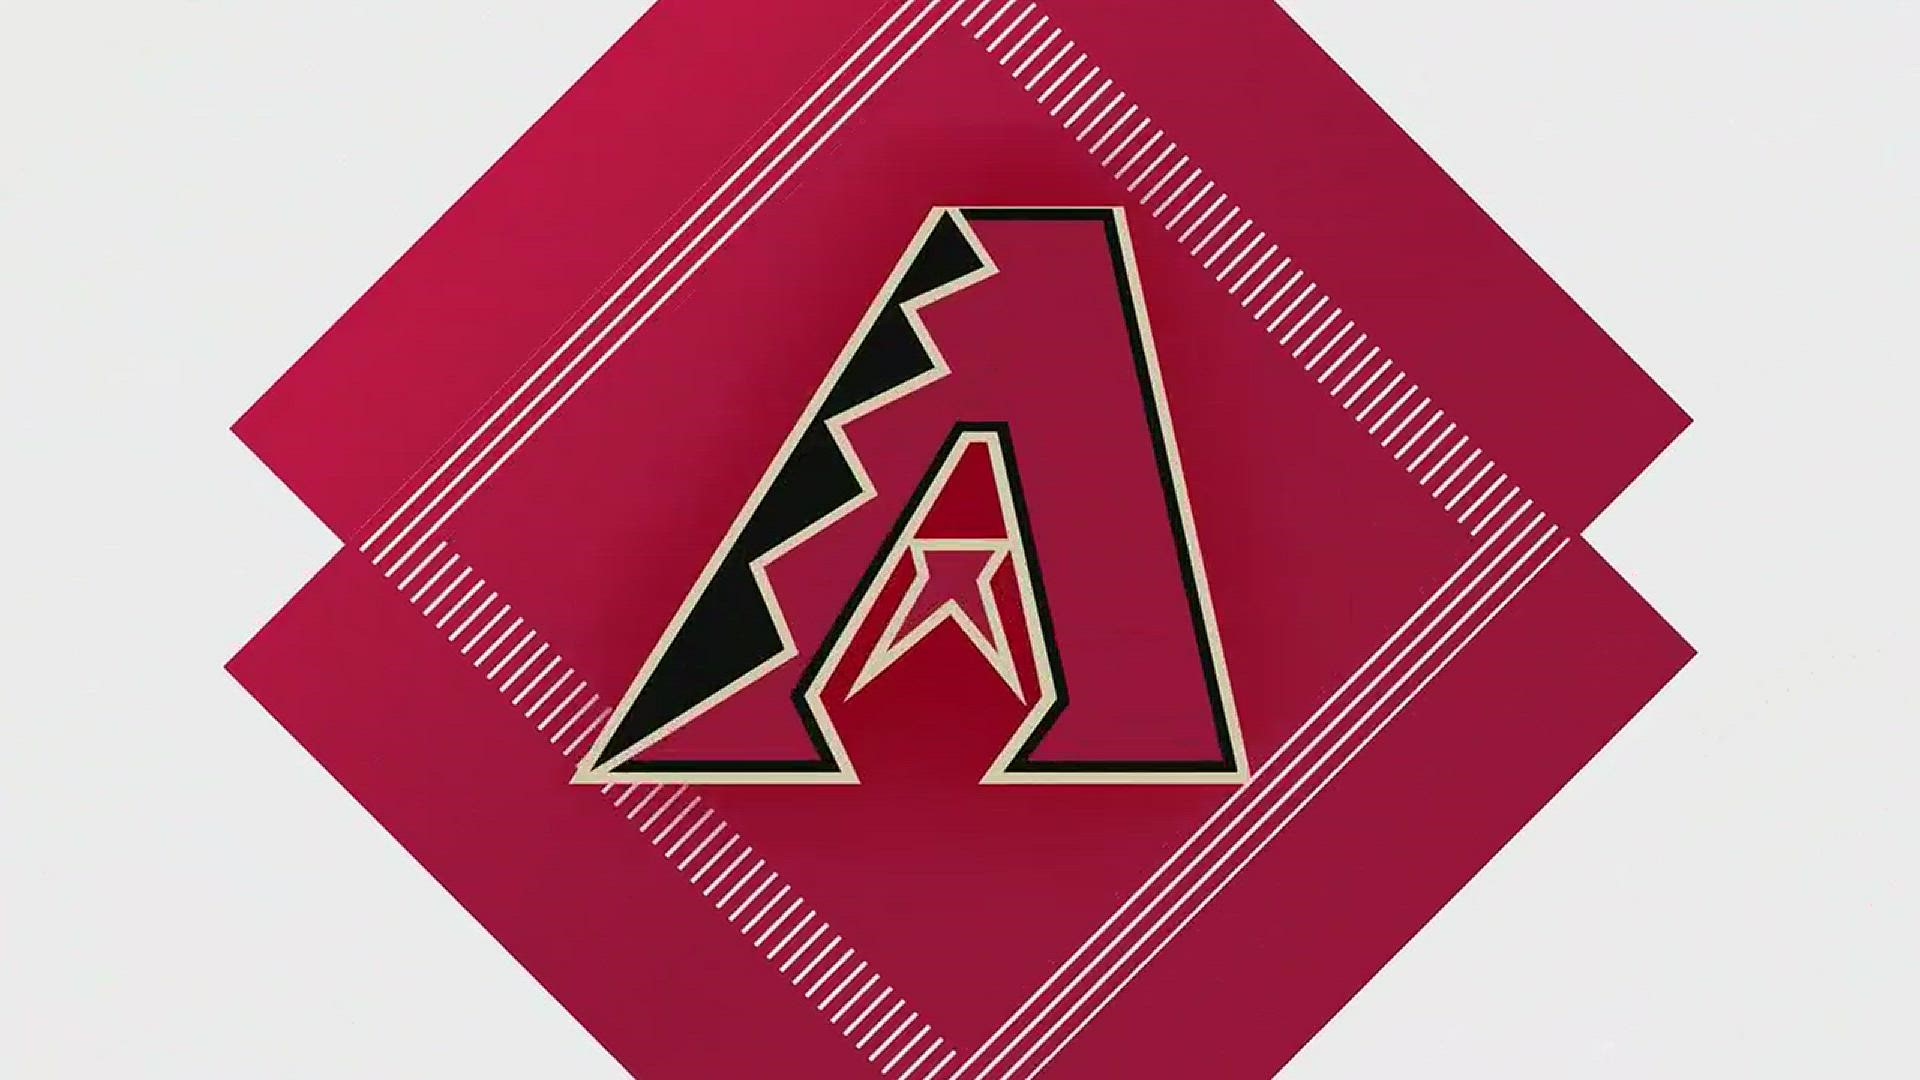 12 News has your back with Everything Diamondbacks! Watch 12 Today and First @ 4 every Friday the D-backs have a home game and we can hook you up.